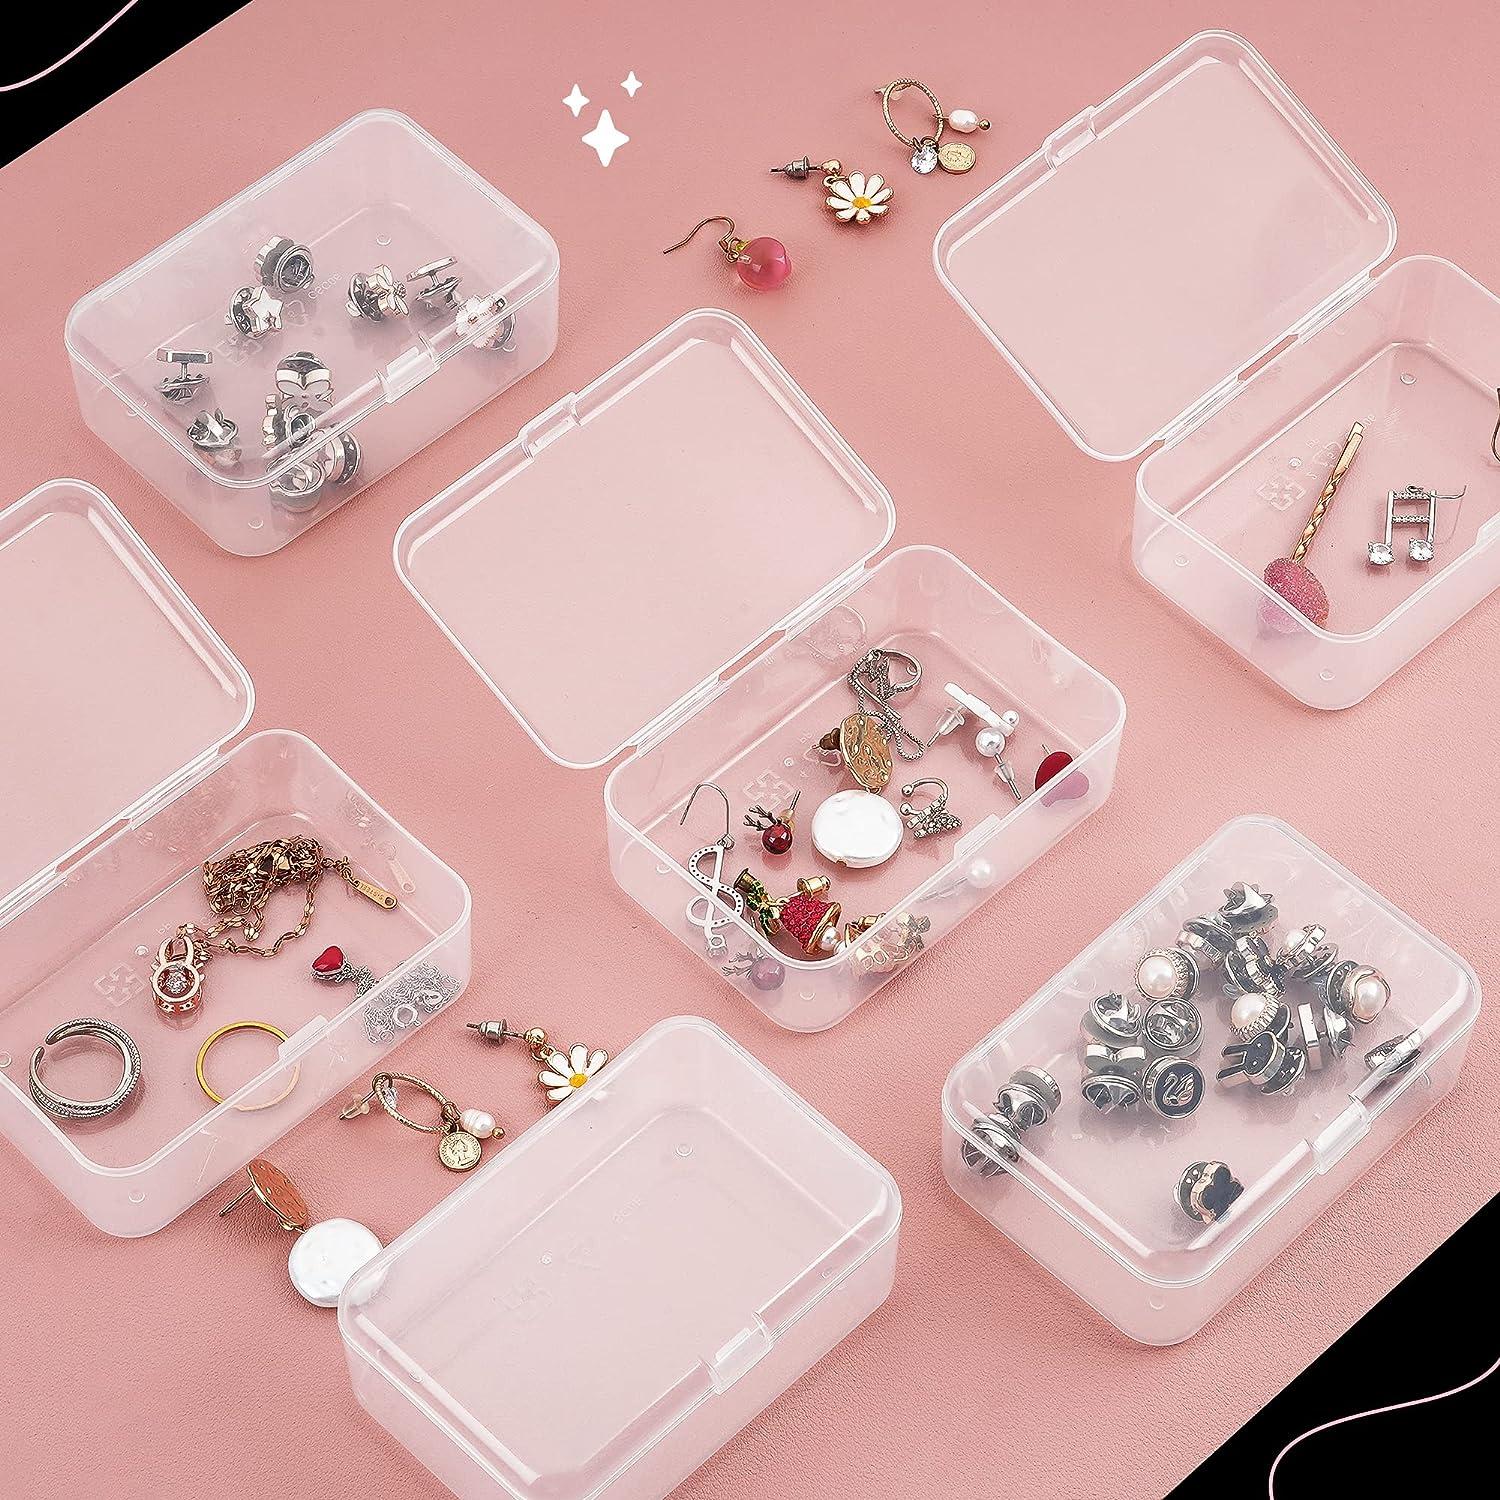 Honbon Small Plastic Storage Box for Earrings ,Beads,pills and